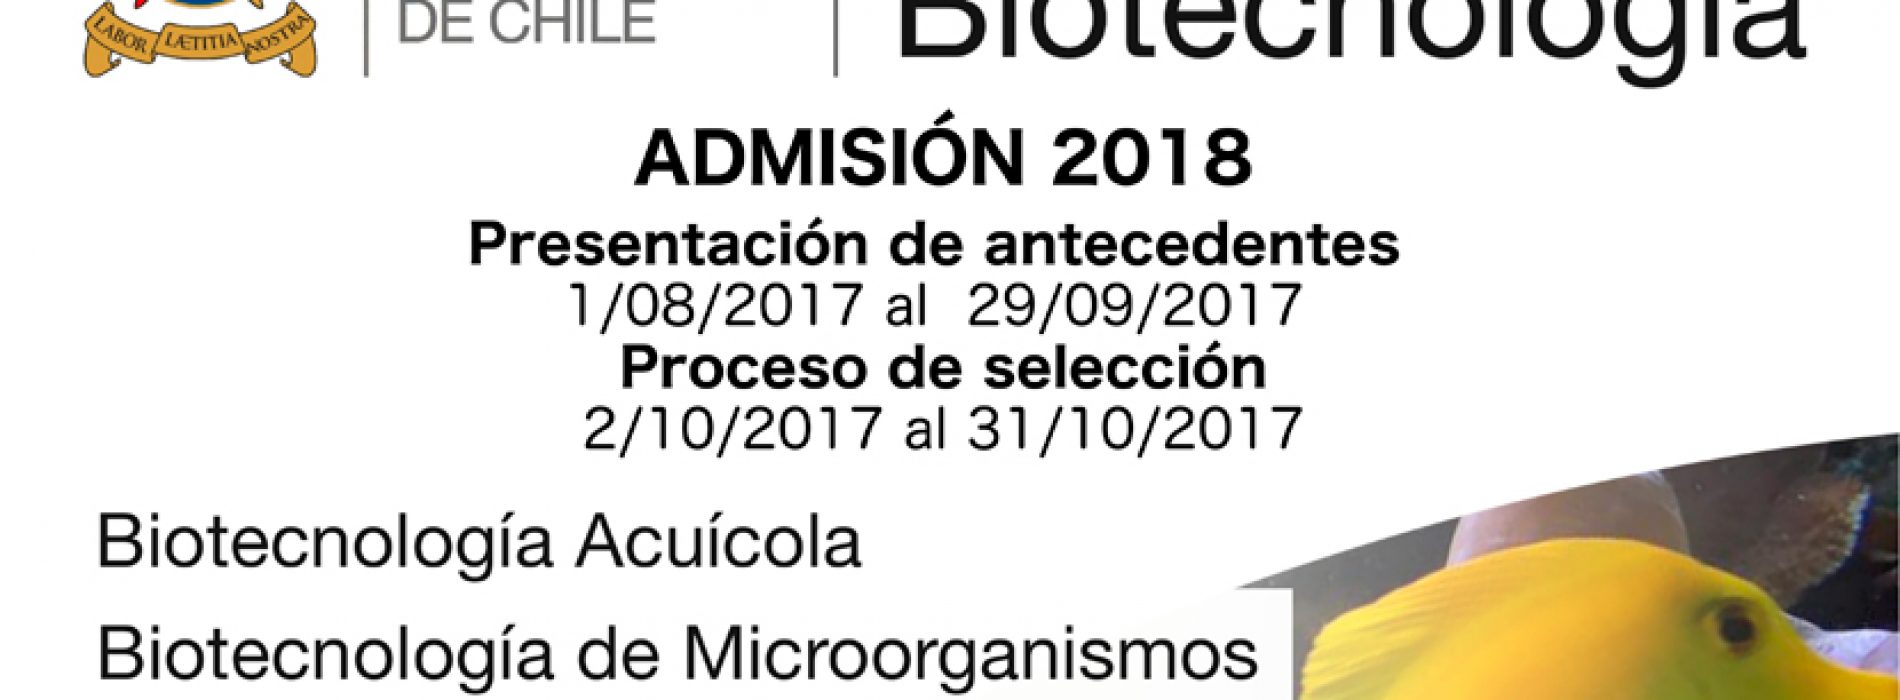 PhD in biotechnology USACH admission process